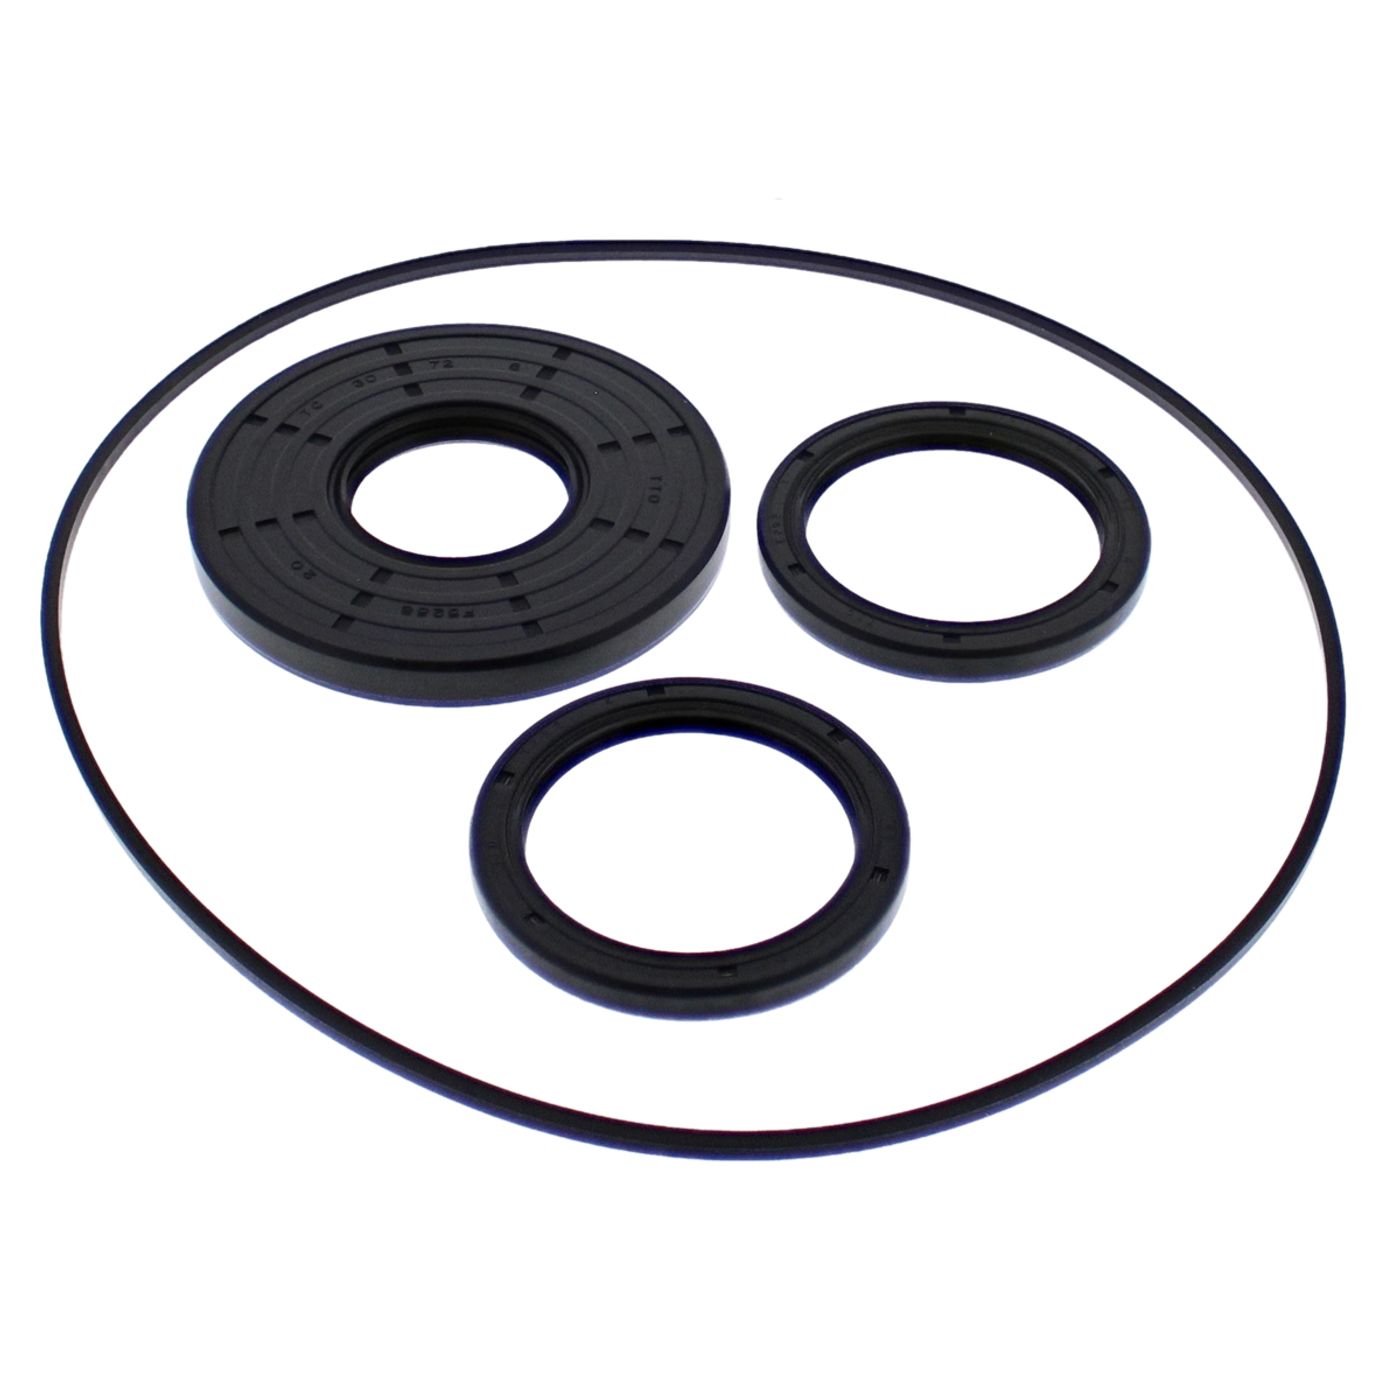 Wrp Diff Seal Kits - WRP252108-5 image